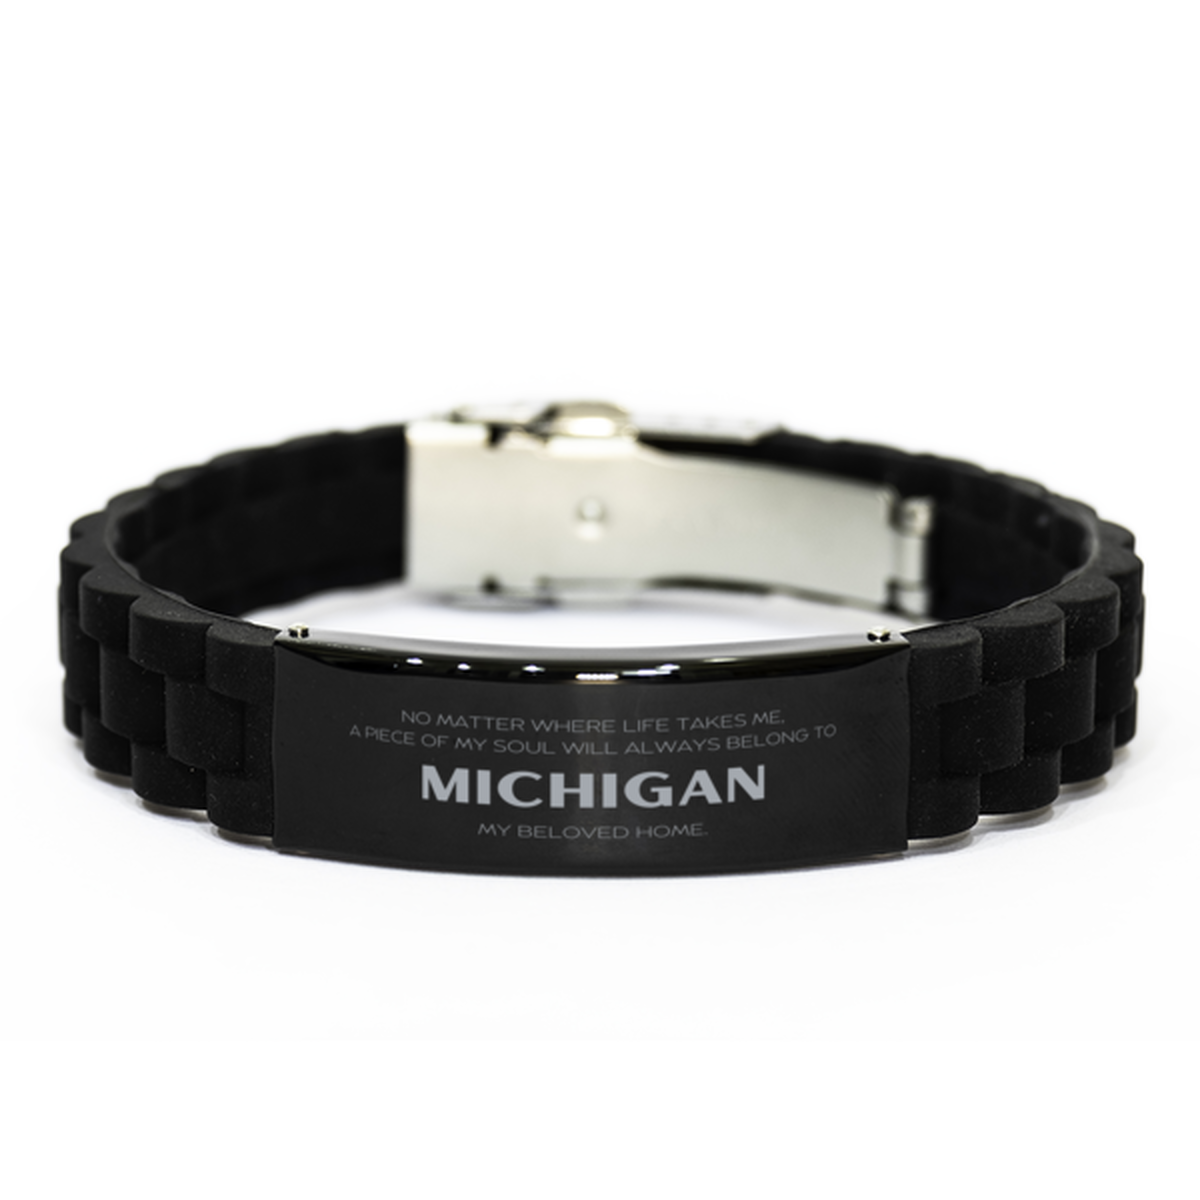 Love Michigan State Gifts, My soul will always belong to Michigan, Proud Black Glidelock Clasp Bracelet, Birthday Unique Gifts For Michigan Men, Women, Friends